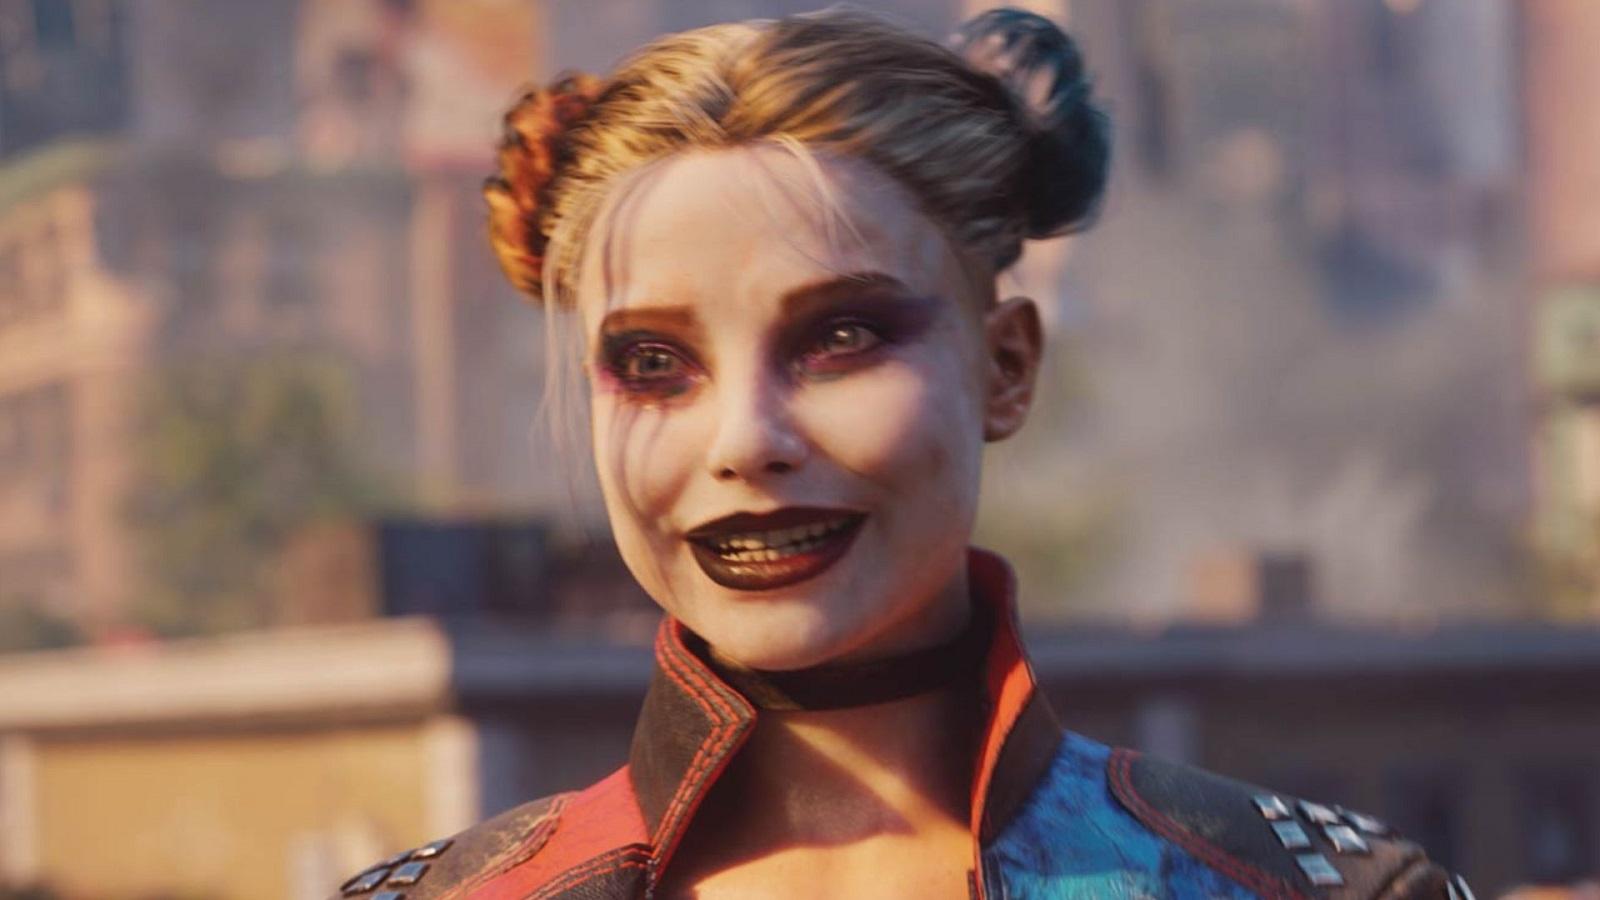 Suicide Squad: Kill The Justice League Gameplay Debuts At The Game